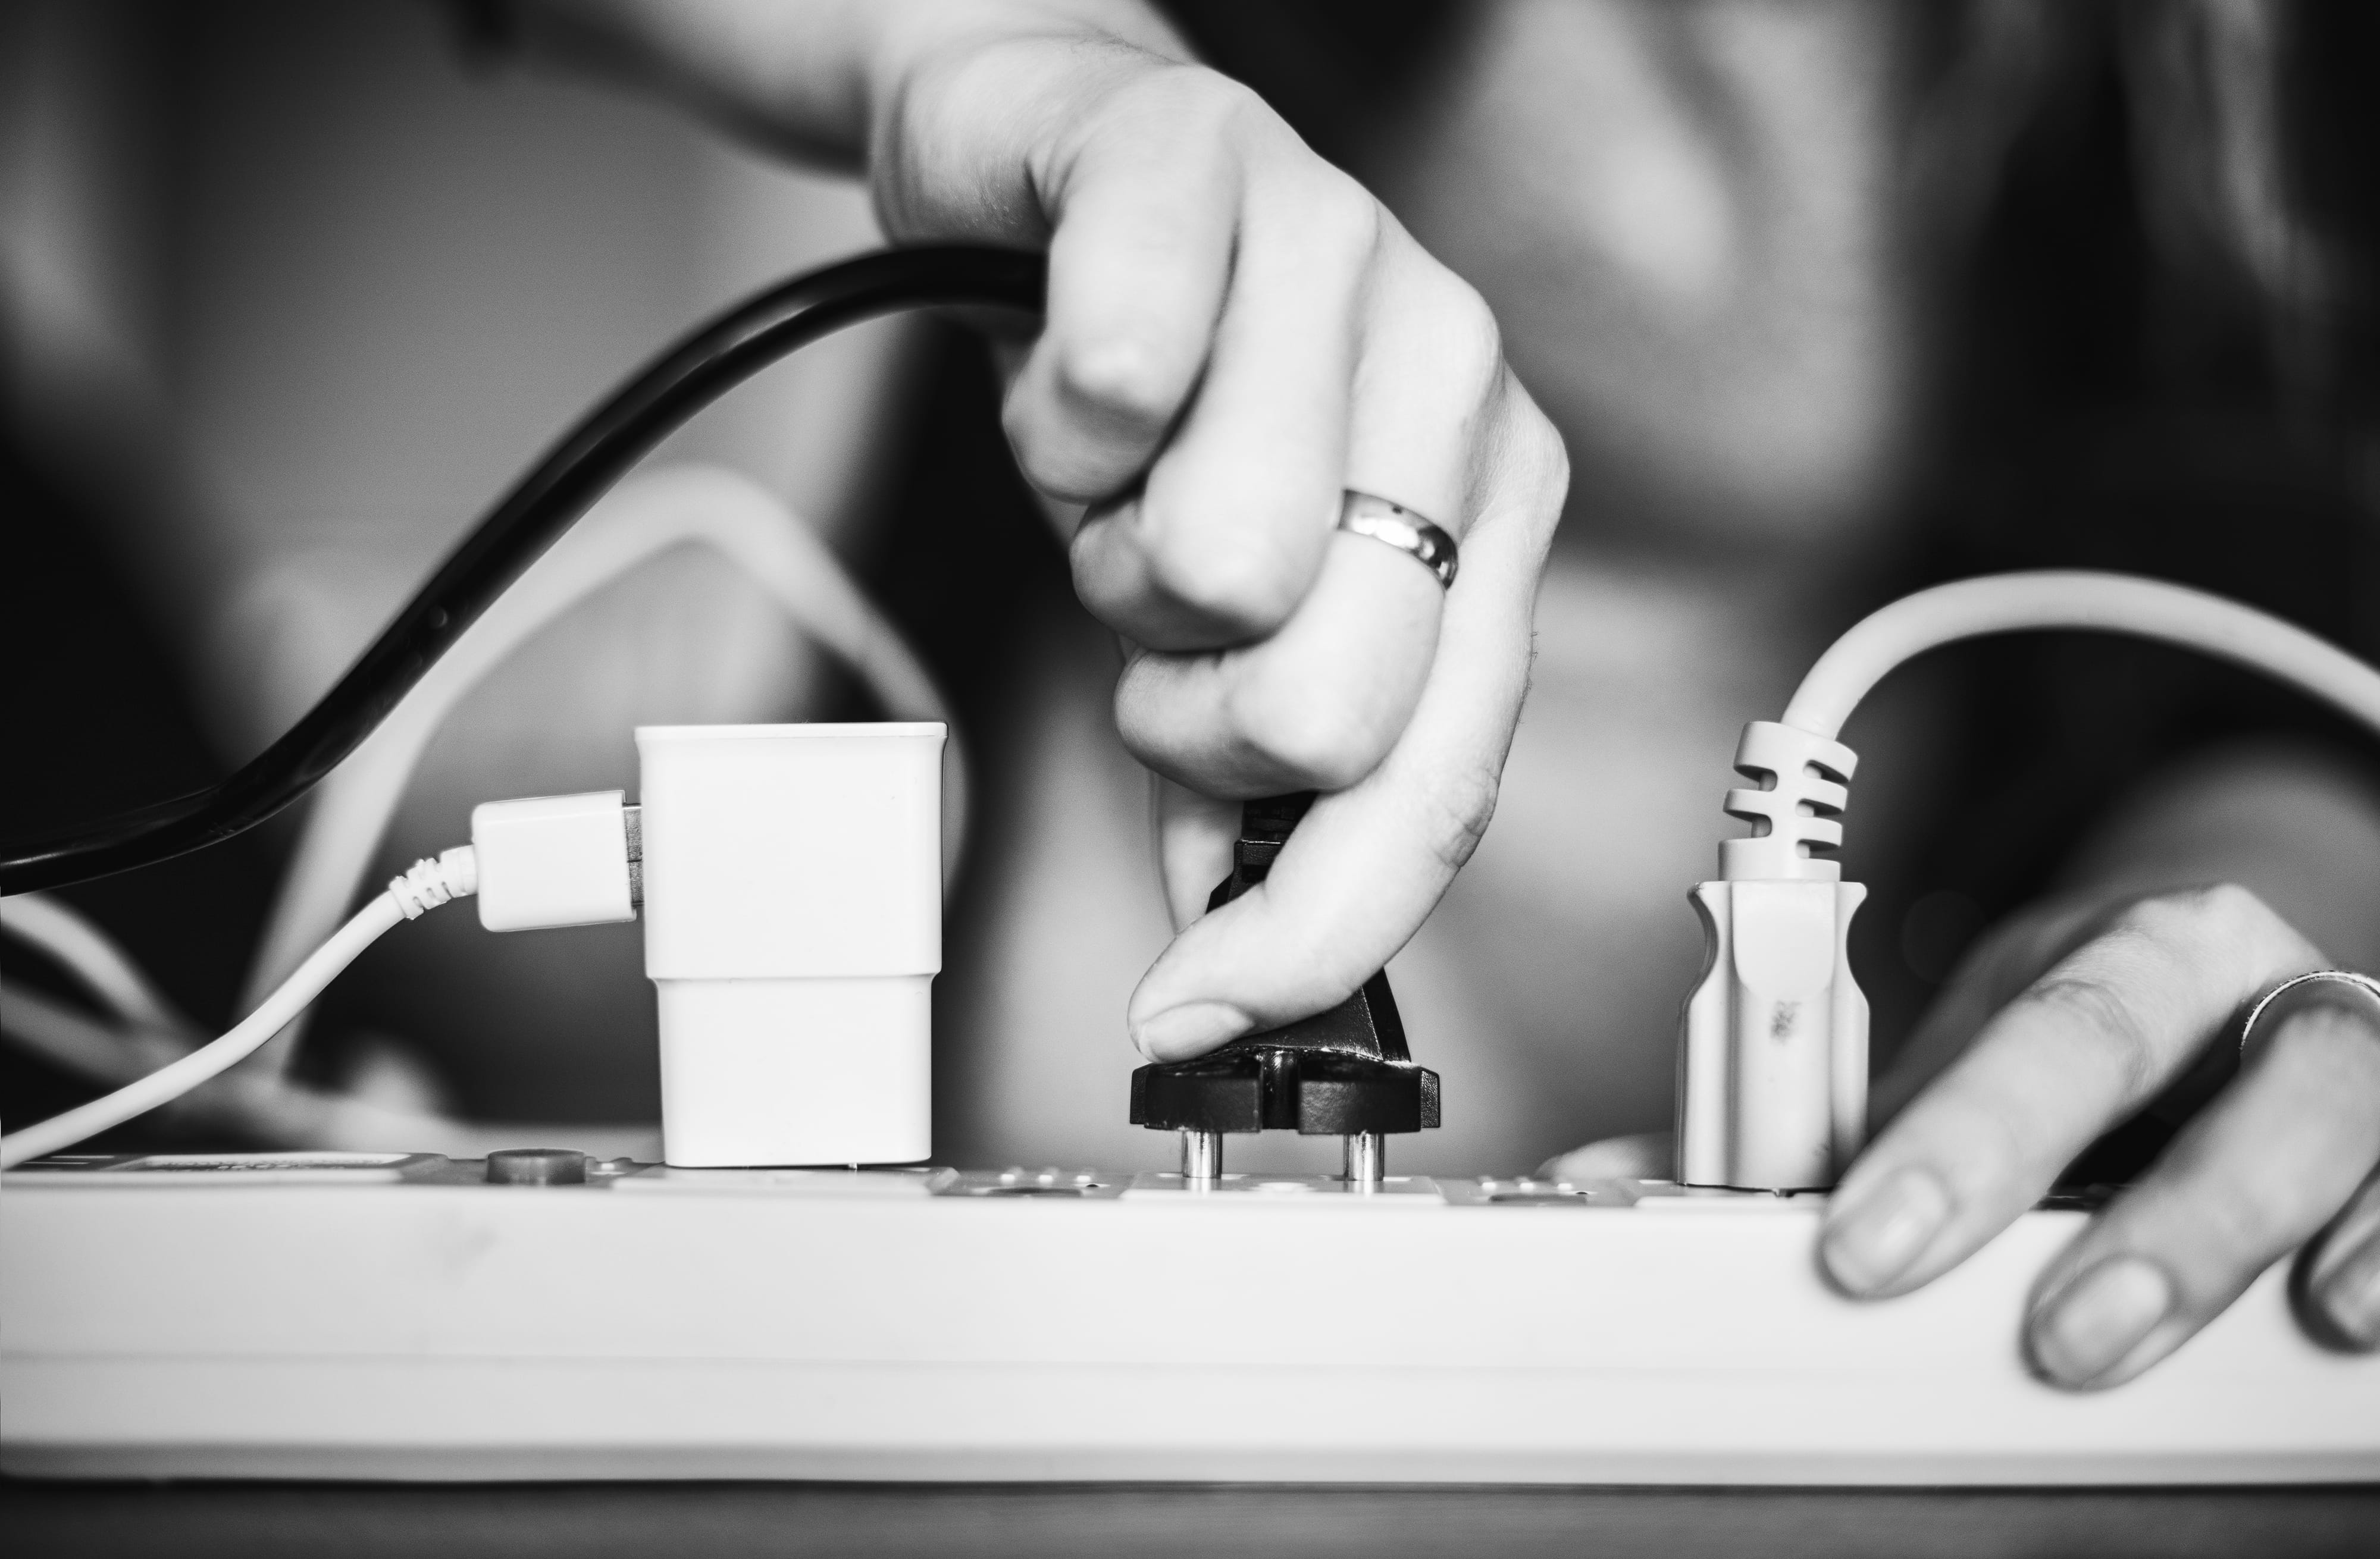 black-and-white-blurred-background-cables-charger-648fdbc25984e538dcd9c471bf01db37.jpg